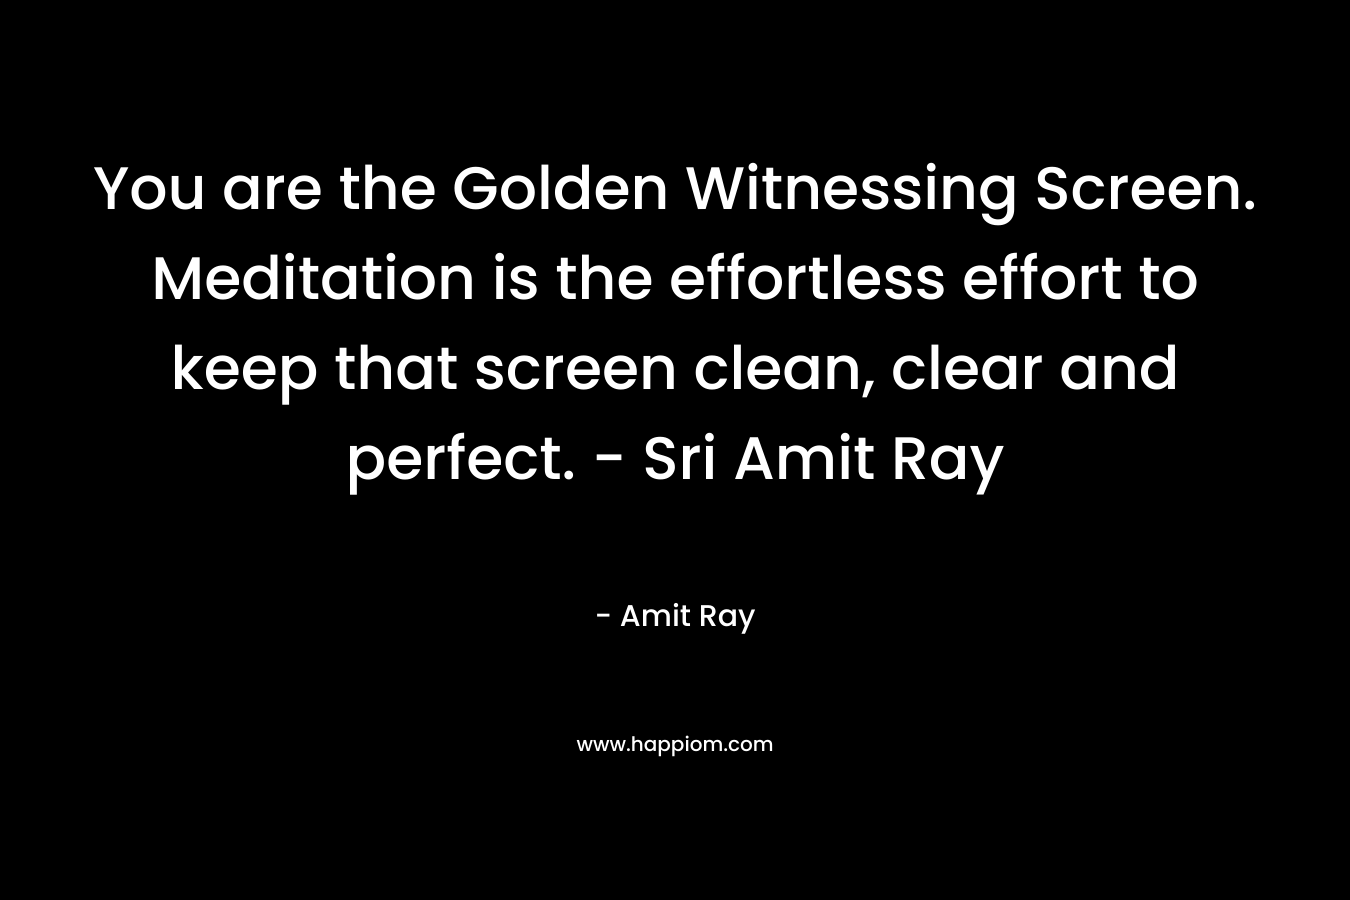 You are the Golden Witnessing Screen. Meditation is the effortless effort to keep that screen clean, clear and perfect. - Sri Amit Ray